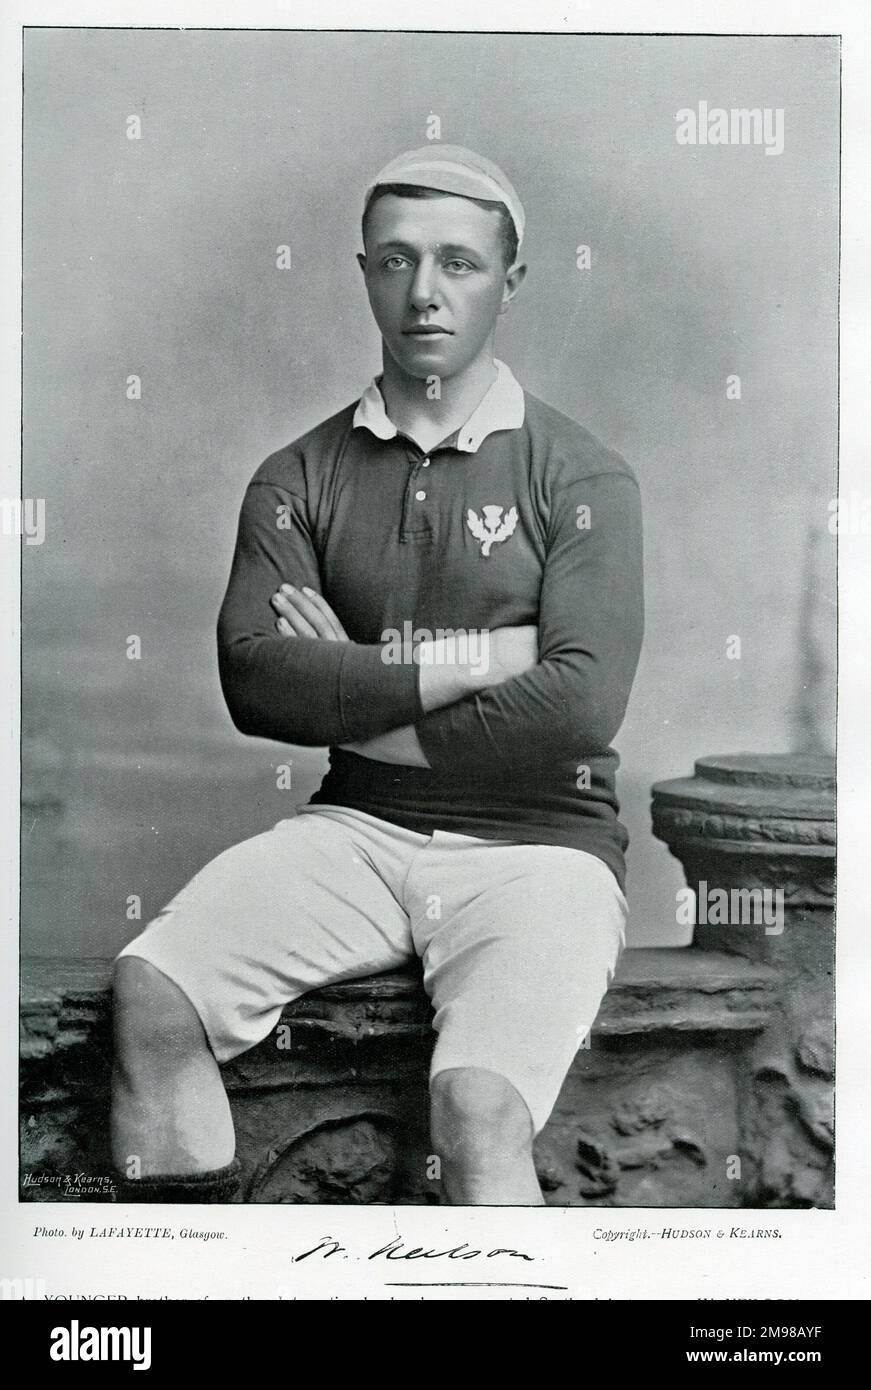 William 'Willie' Neilson (1873-1960), Scottish International Rugby player who also played for London Scottish RFC.  He later became President of the Scottish Rugby Union. Stock Photo